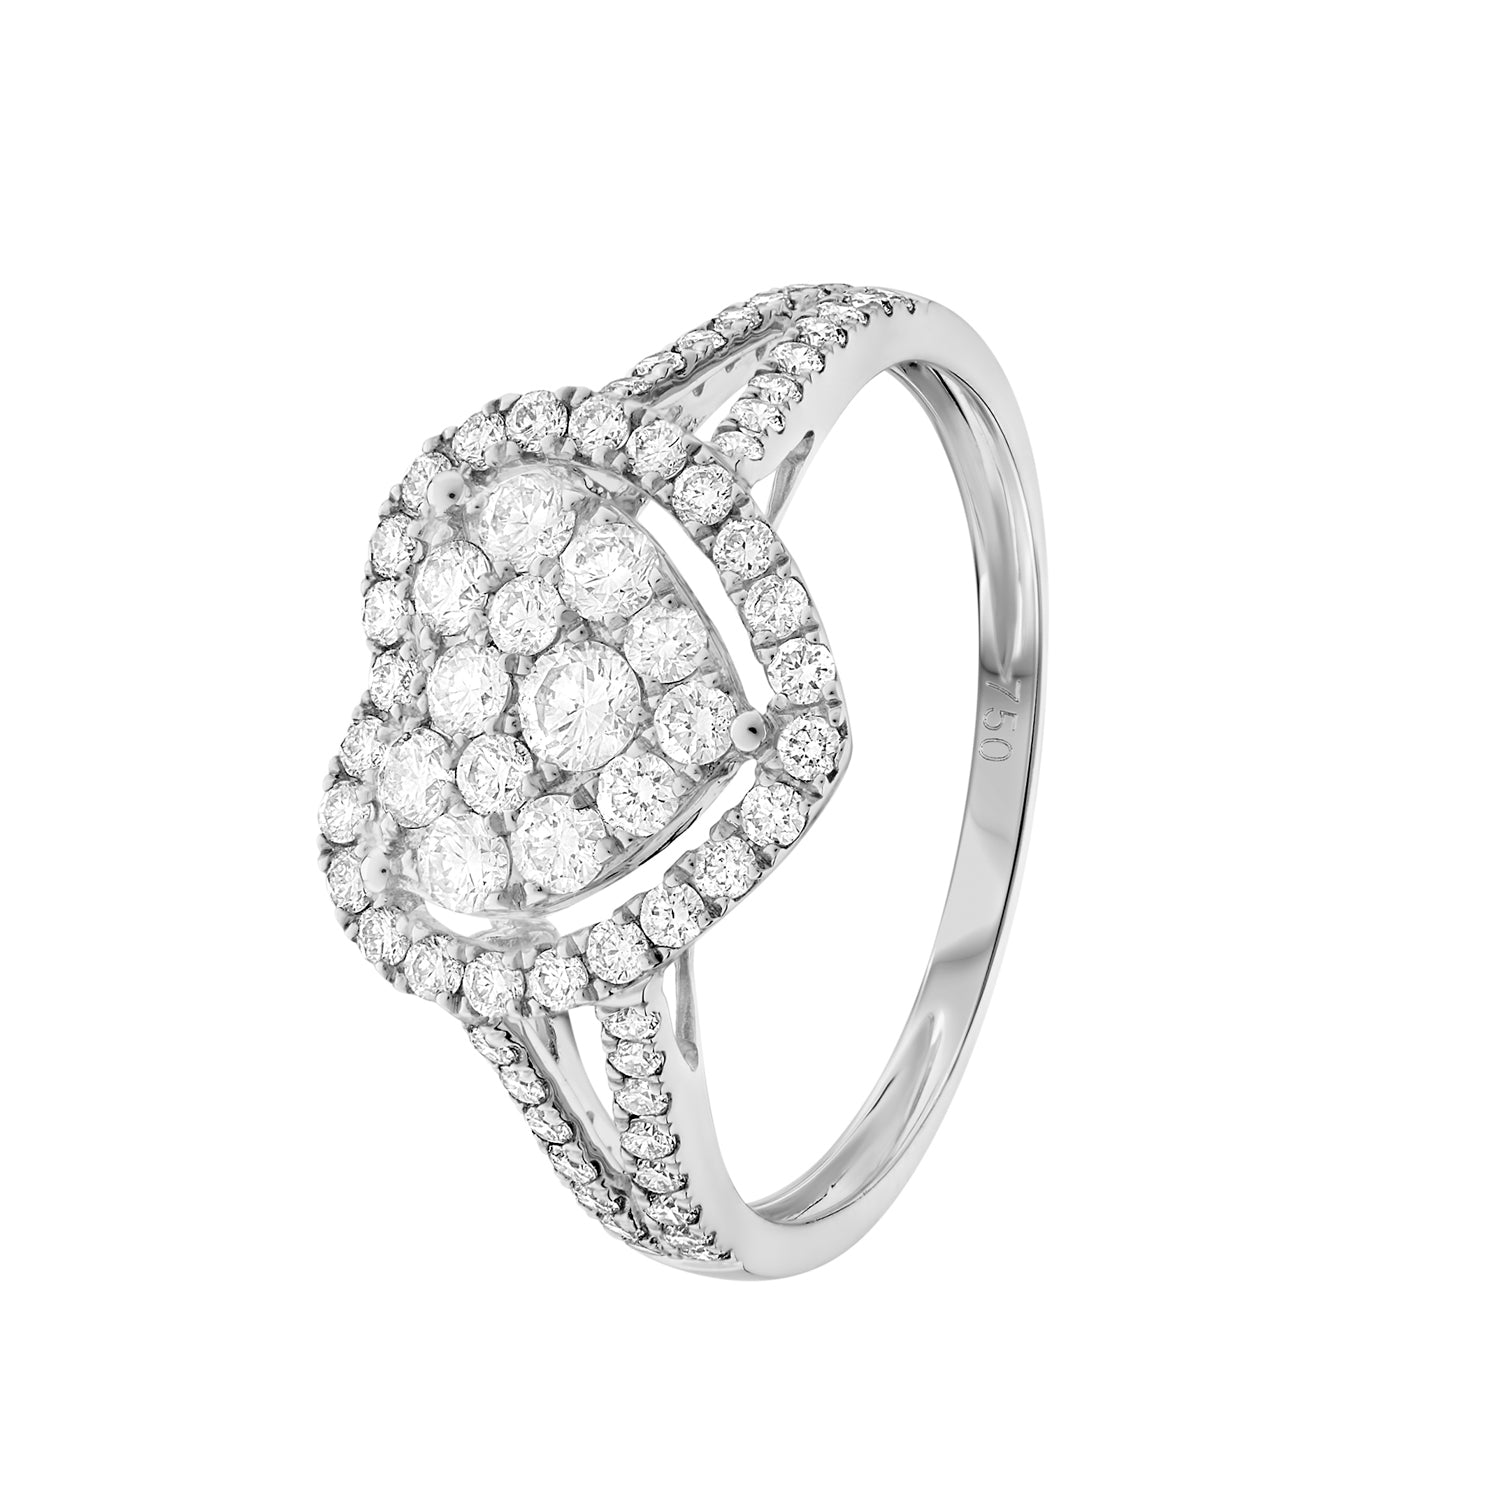 18ct White Gold Heart Halo Cluster Ring With 50% Split Diamond Set Shoulders